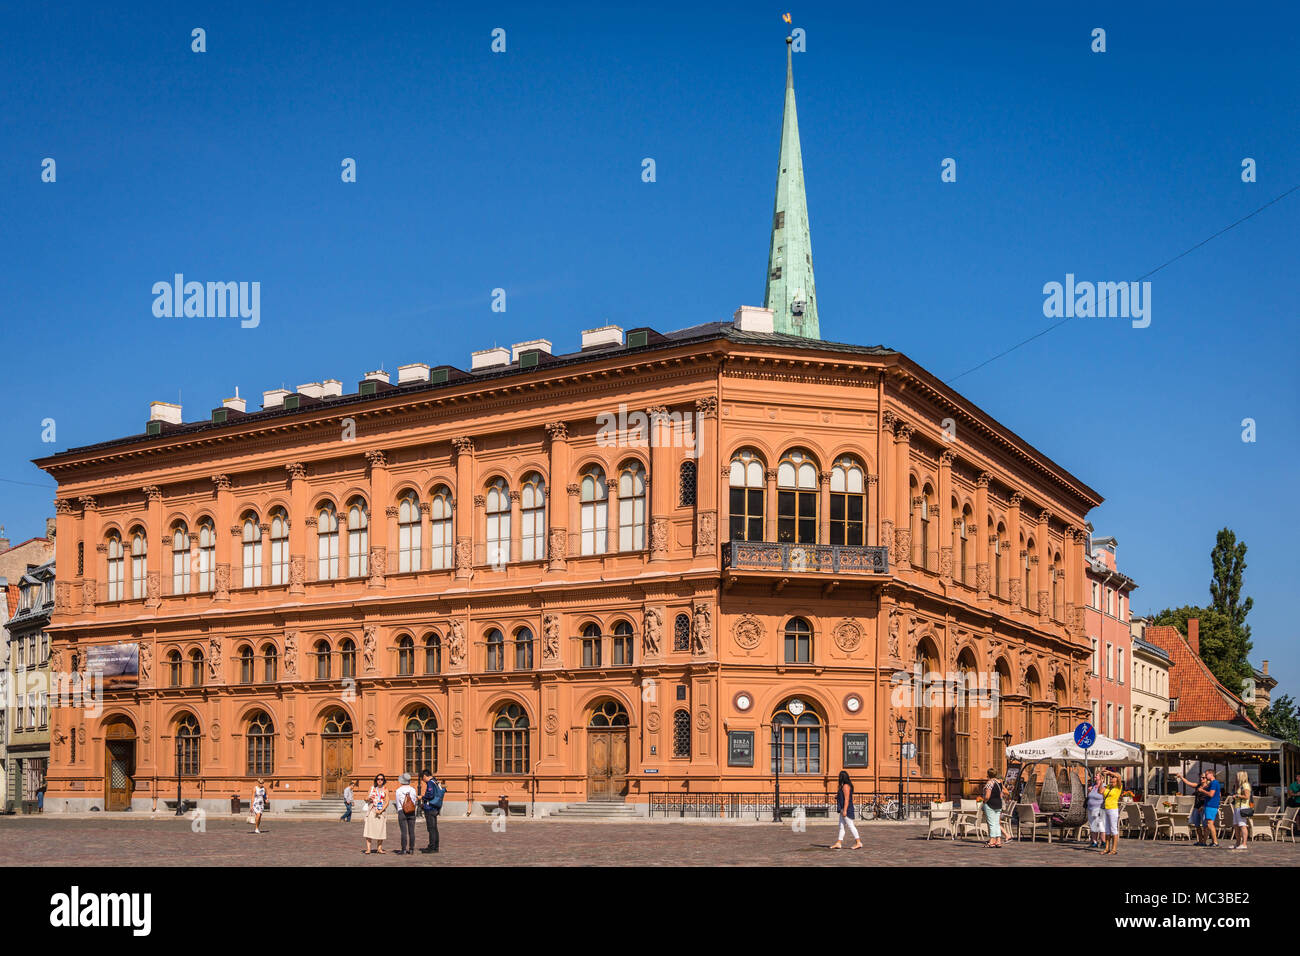 Doma laukums (Dome Square), in the shadows of Riga Cathedral, in Riga  (Latvia Stock Photo - Alamy